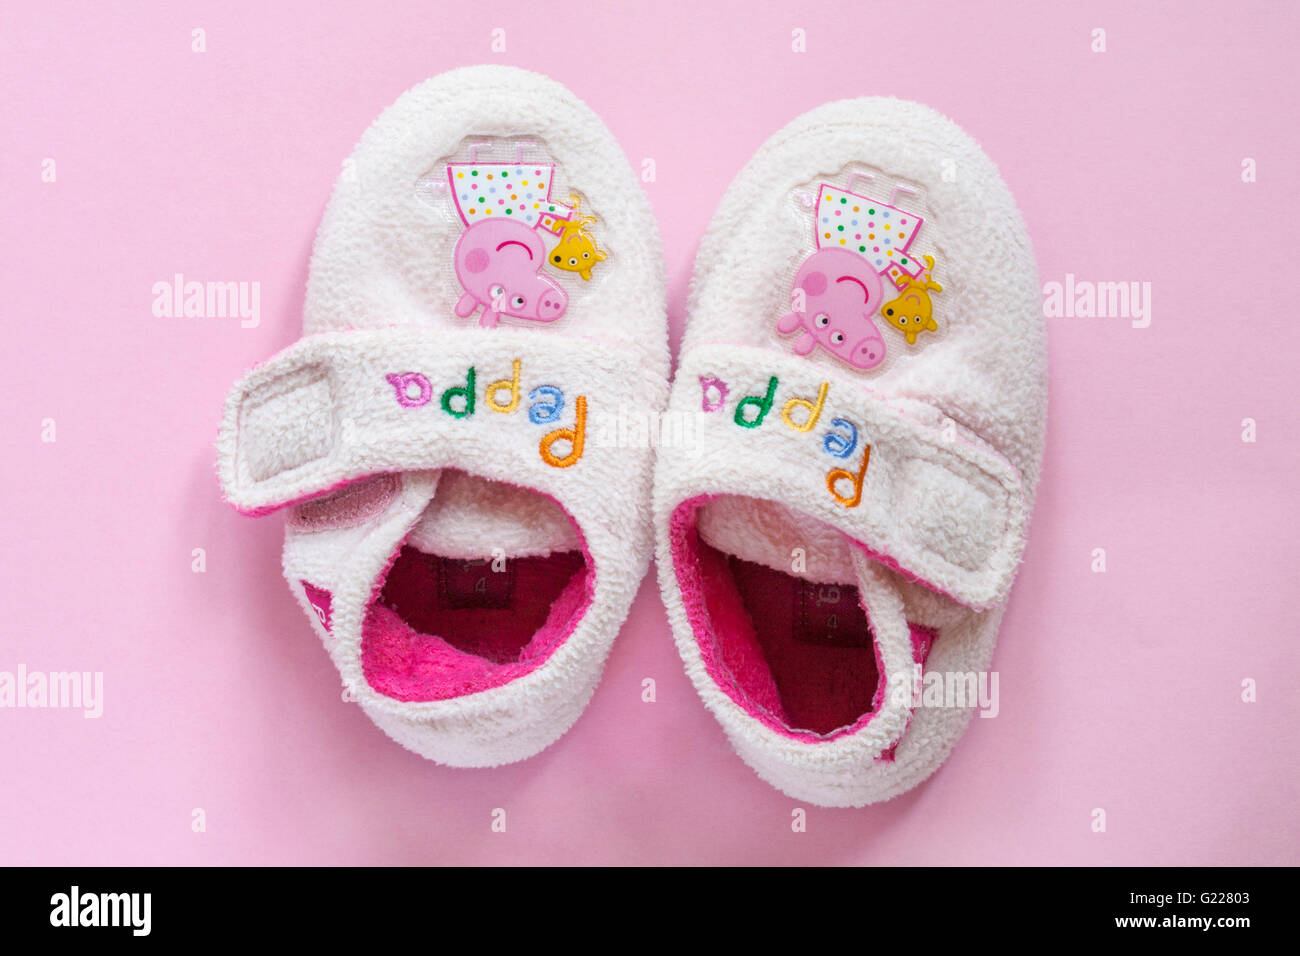 Share 199+ peppa pig slippers